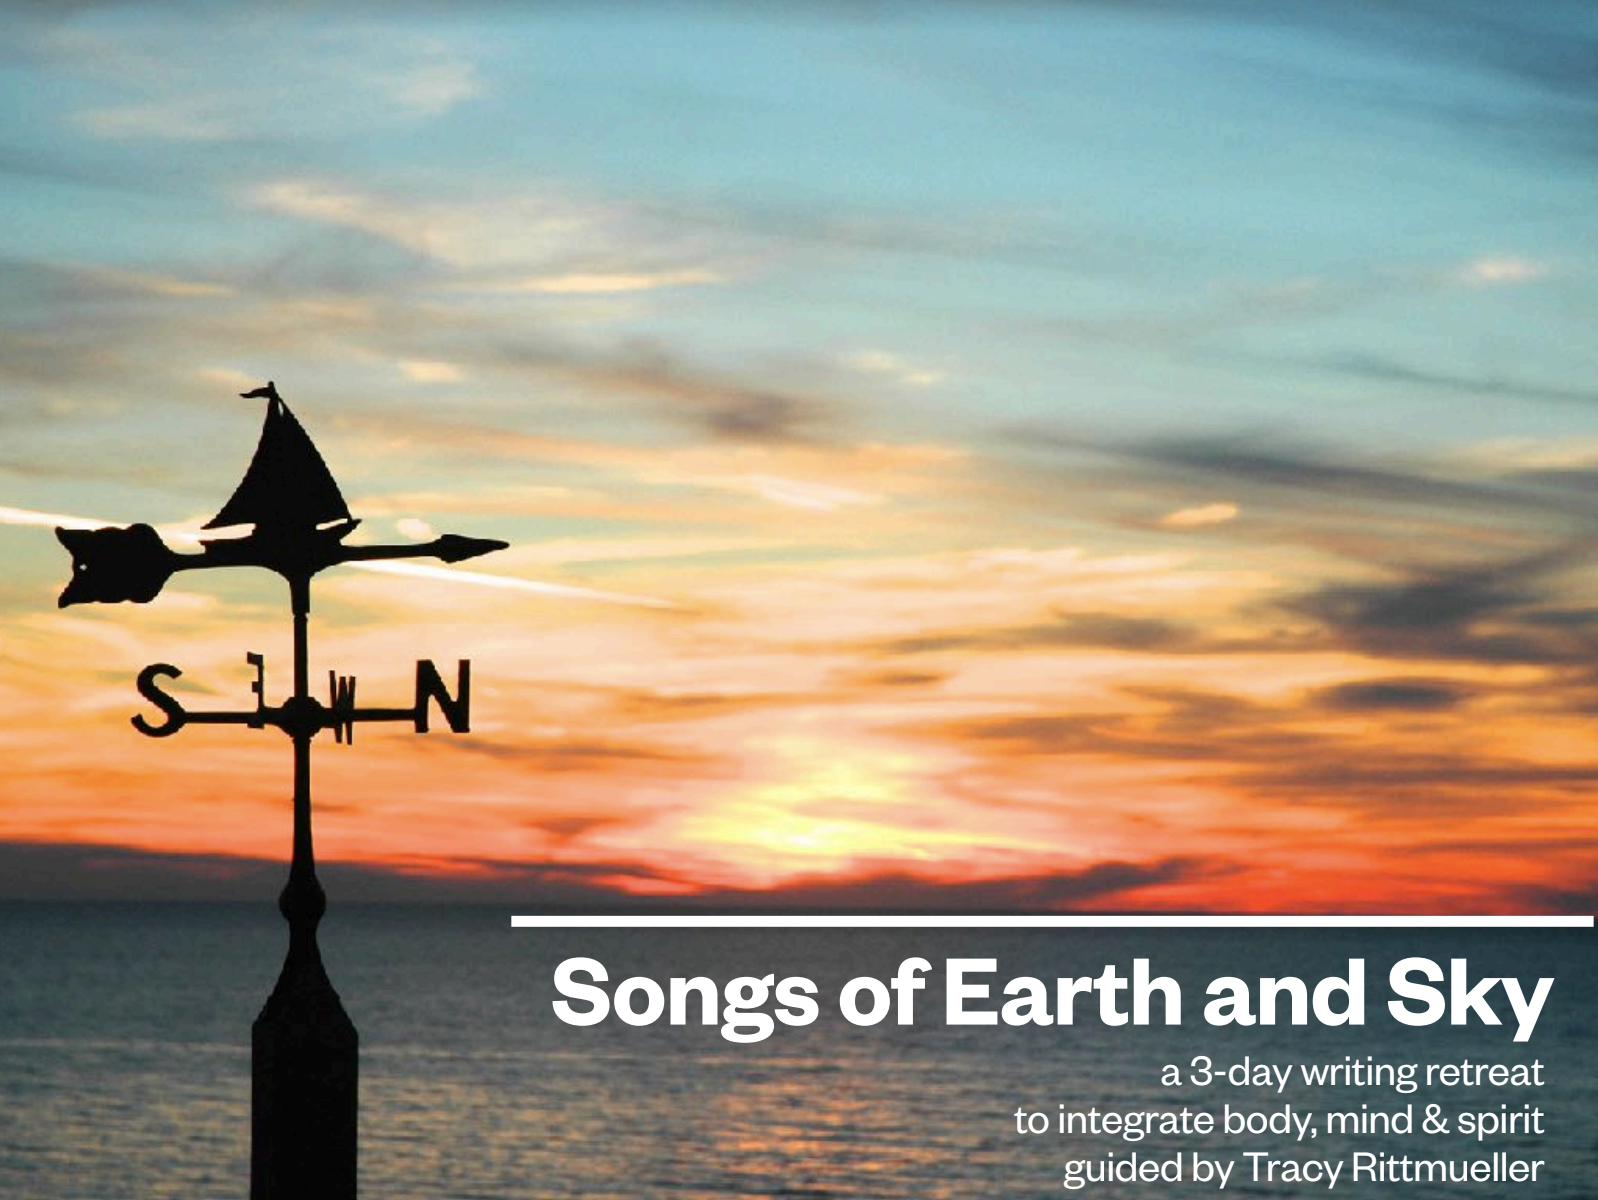 Songs of Earth and Sky